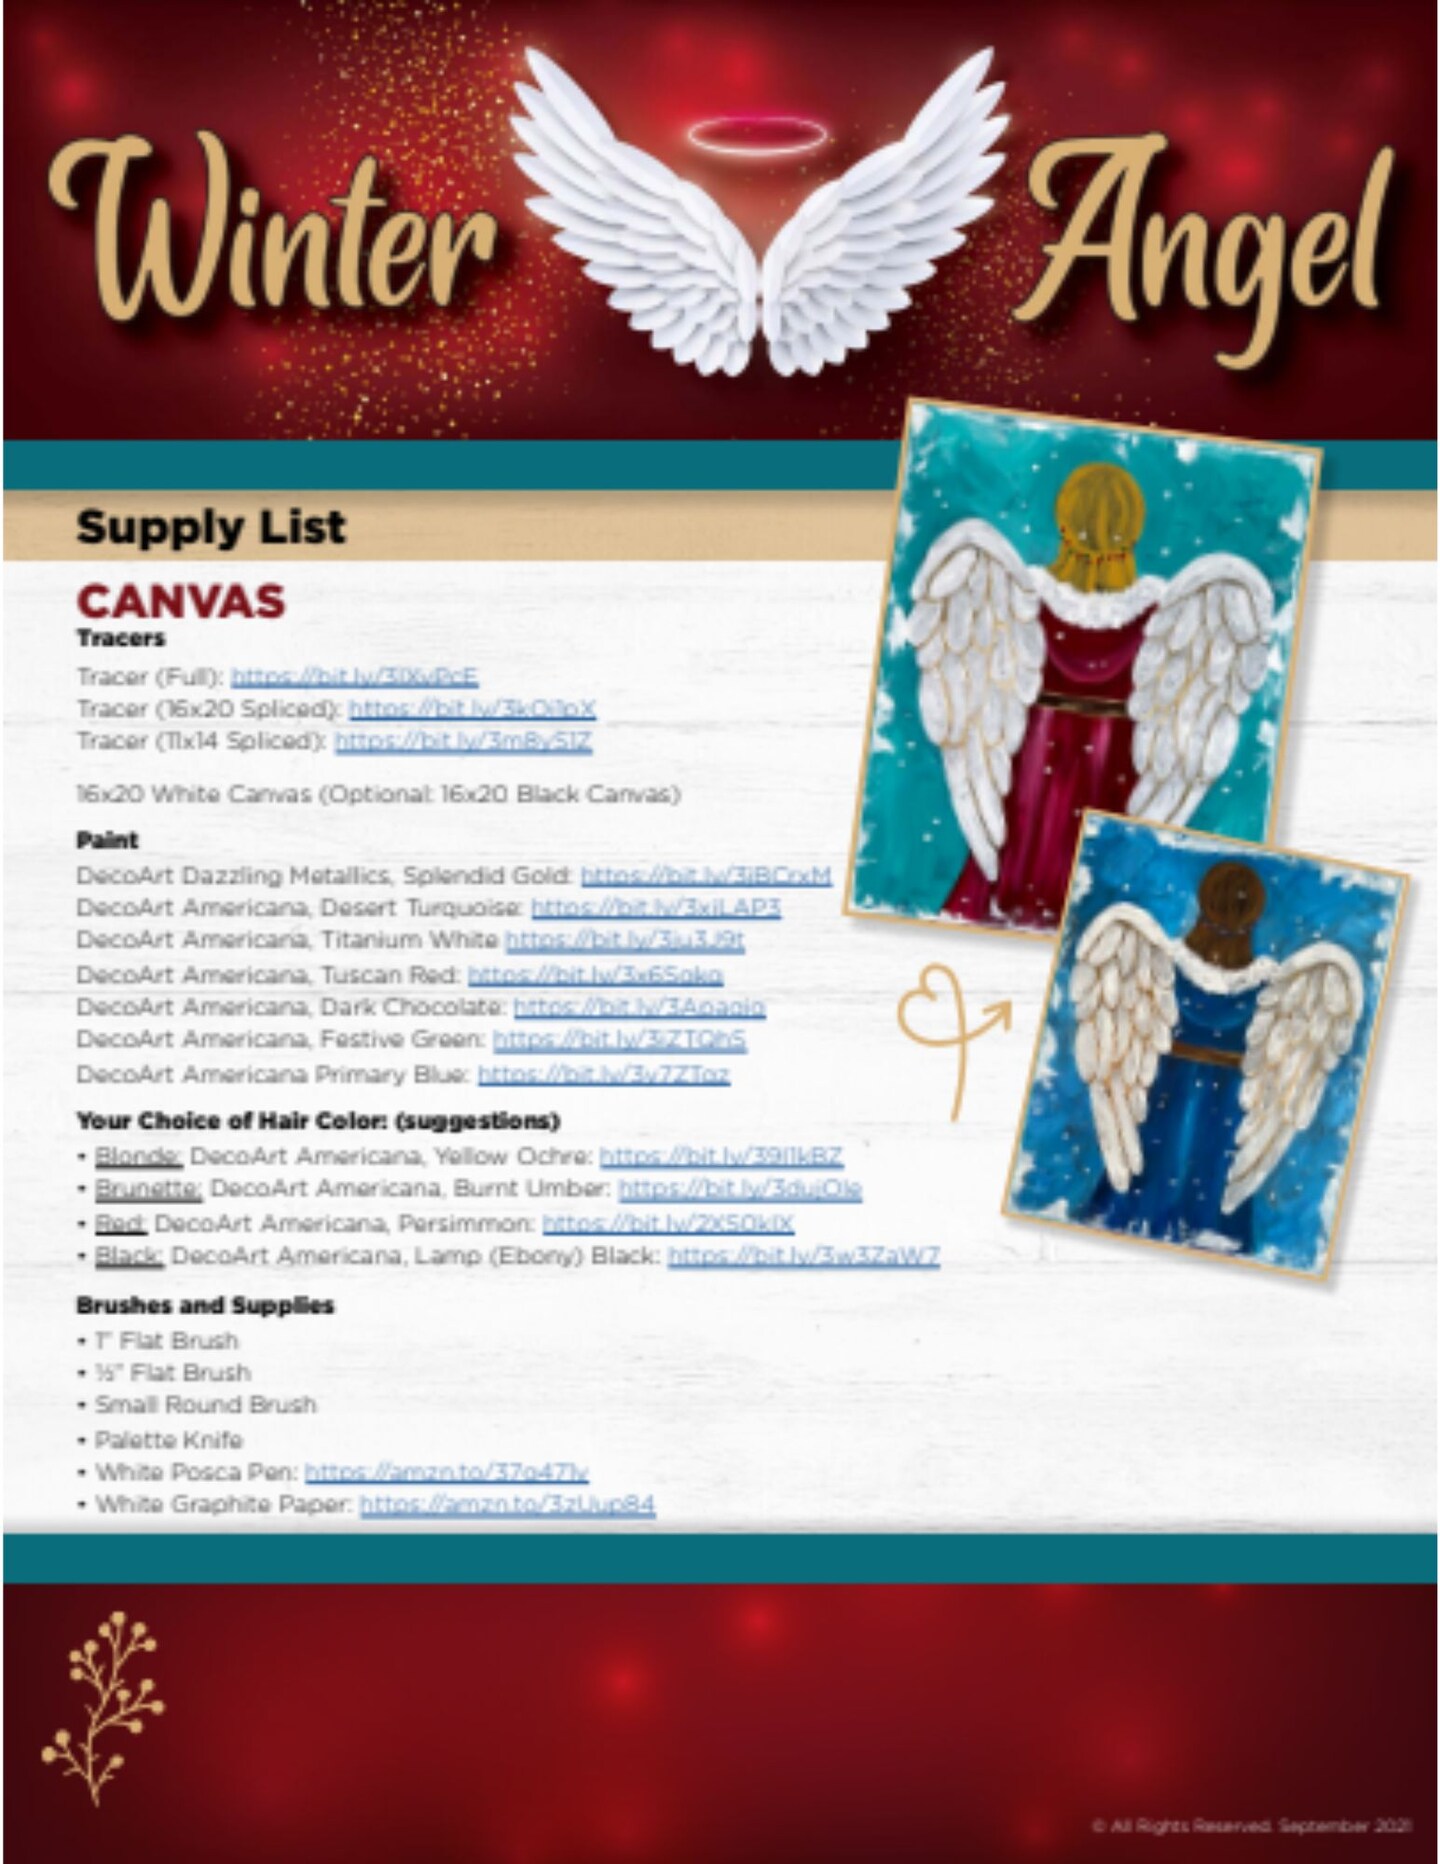 Winter Angel Paint Party